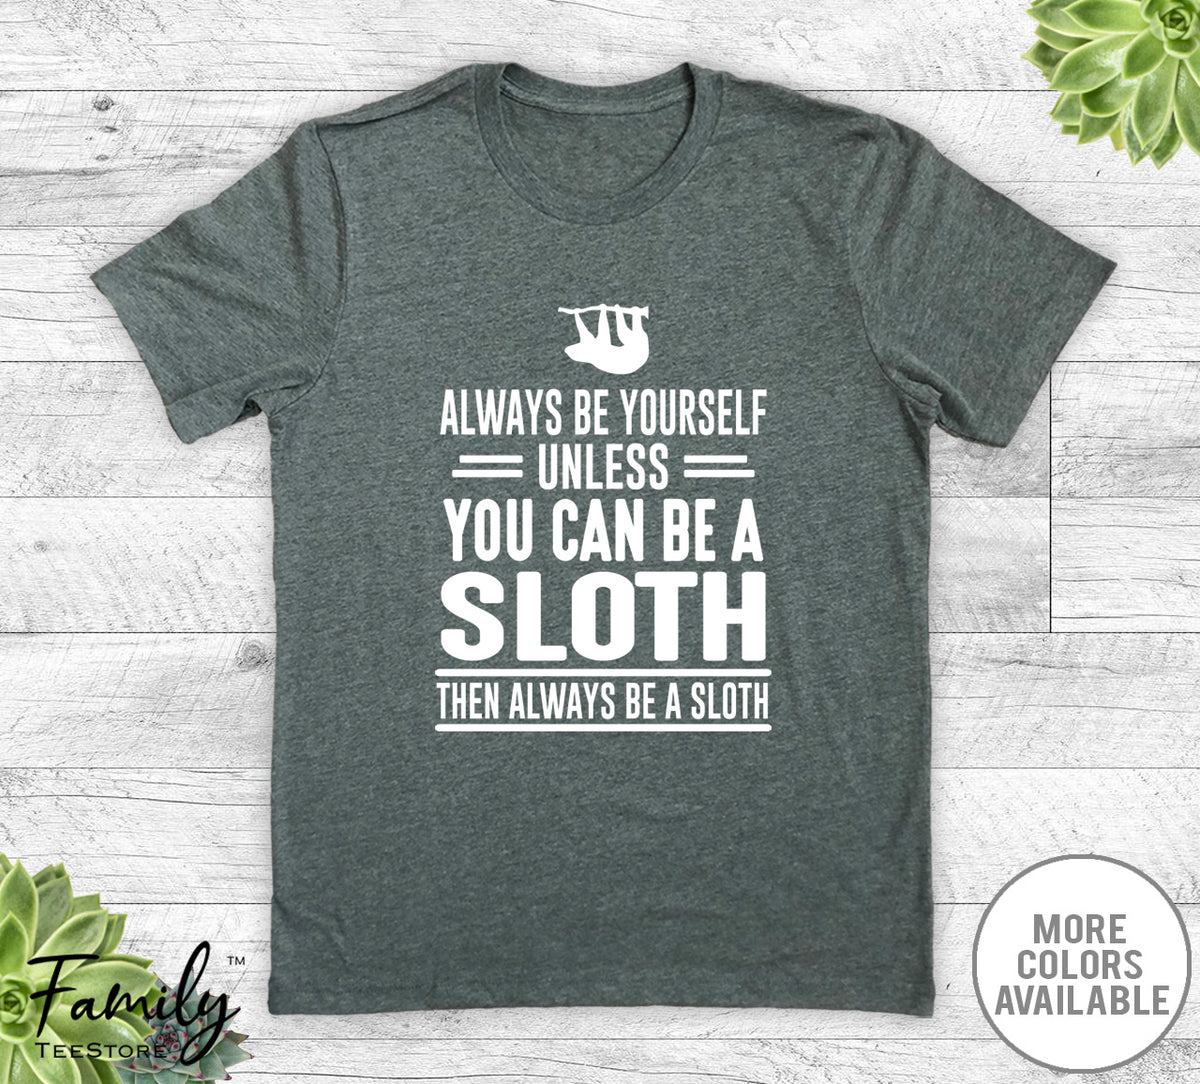 Always Be Yourself Unless You Can Be A Sloth - Unisex T-shirt - Sloth Shirt - Sloth Gift - familyteeprints